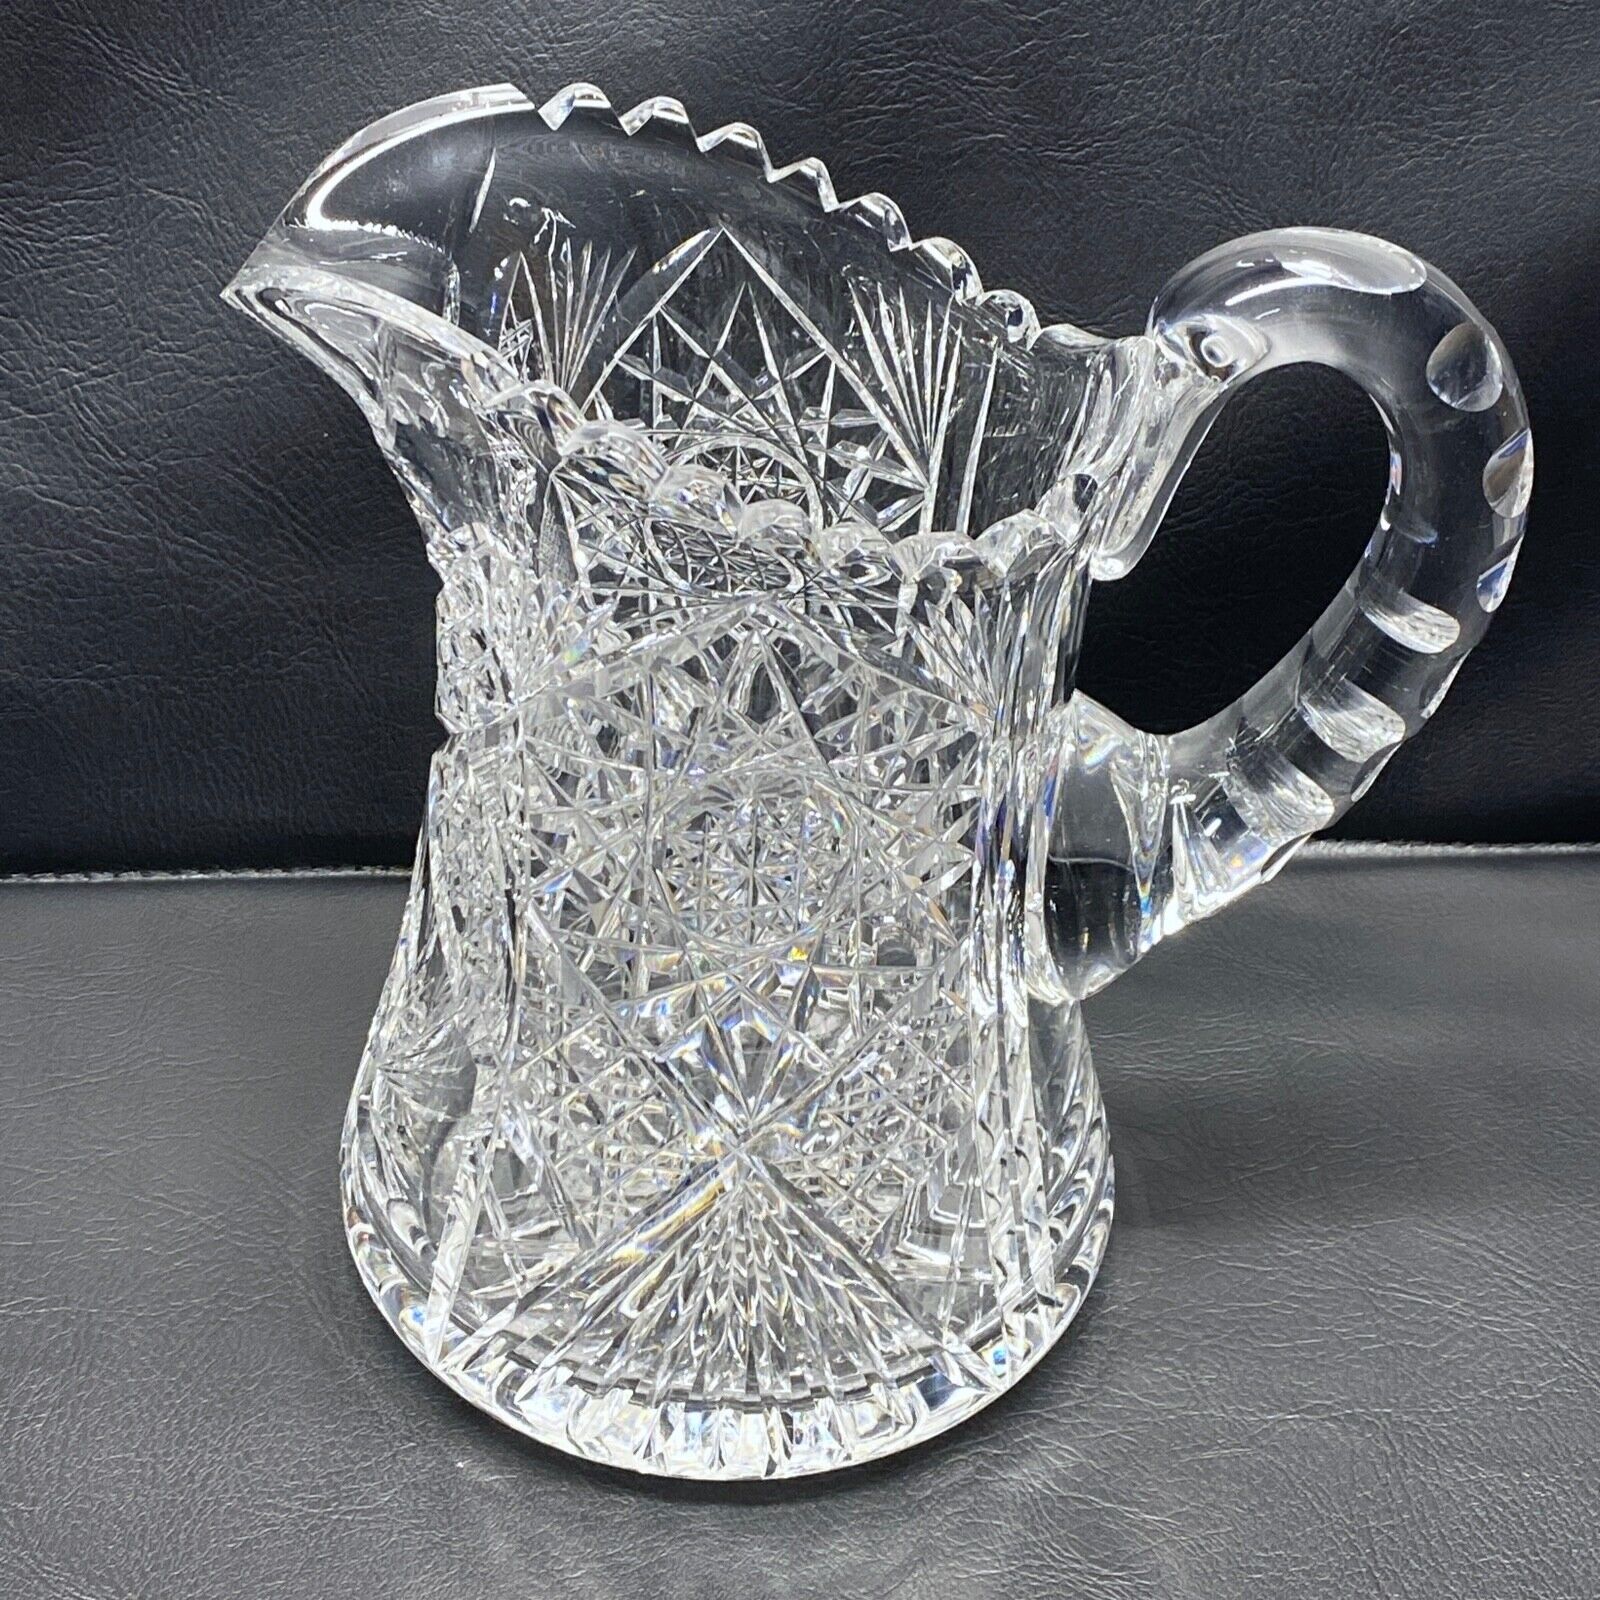 Exquisite Antique Signed FRY American Brilliant Cut Glass Water Pitcher